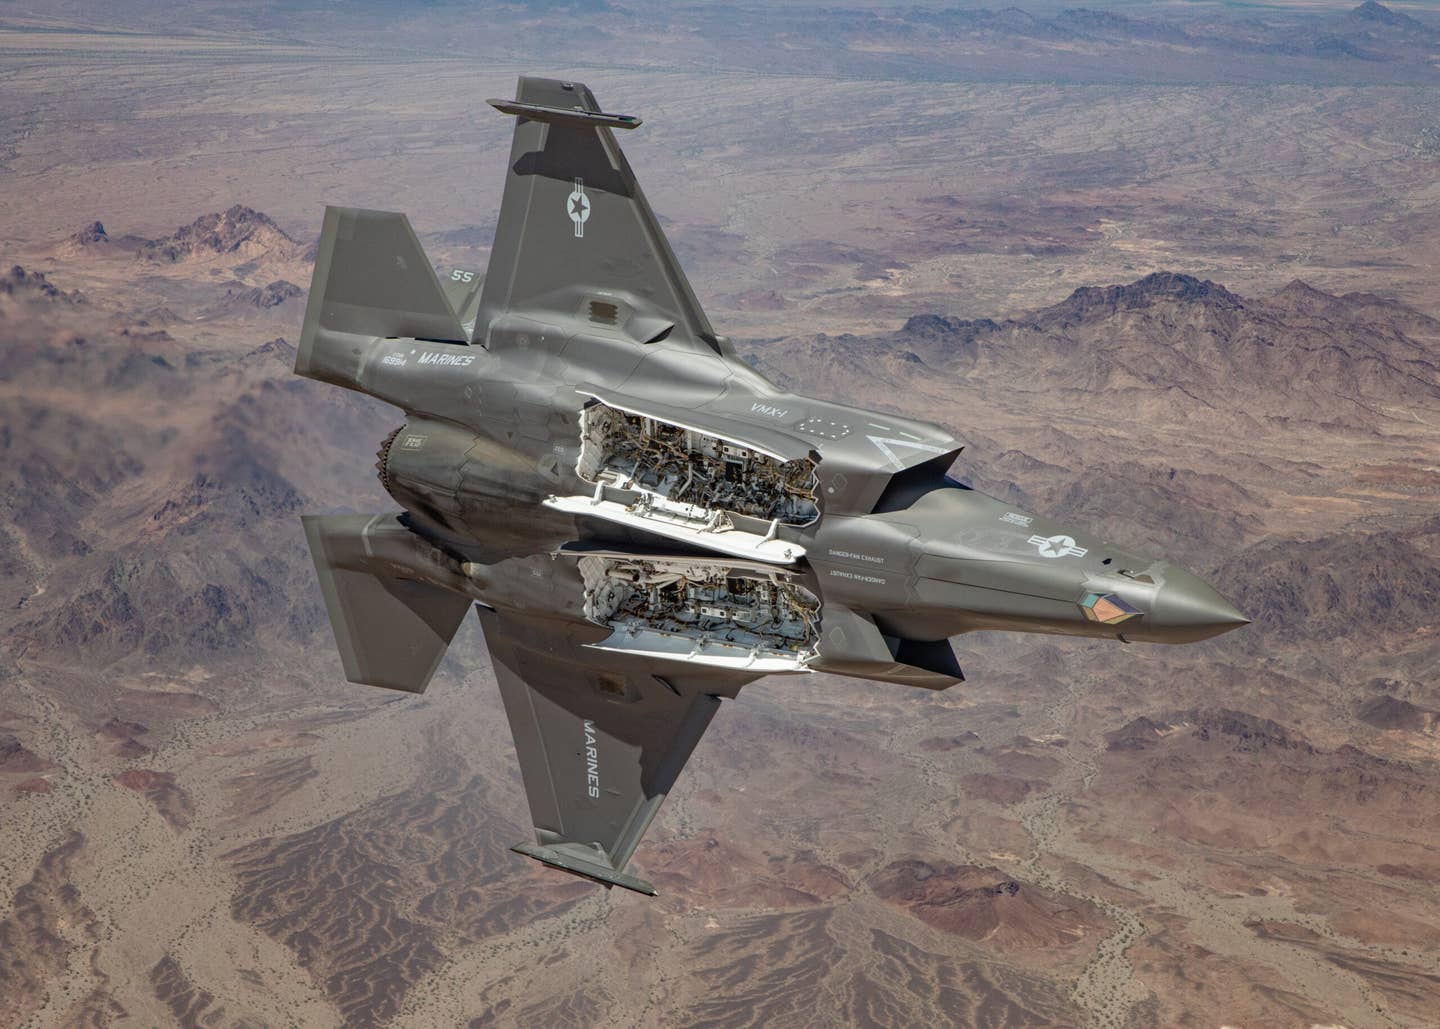 VMX-1 F-35B with its weapons bays open.  (Author's image)